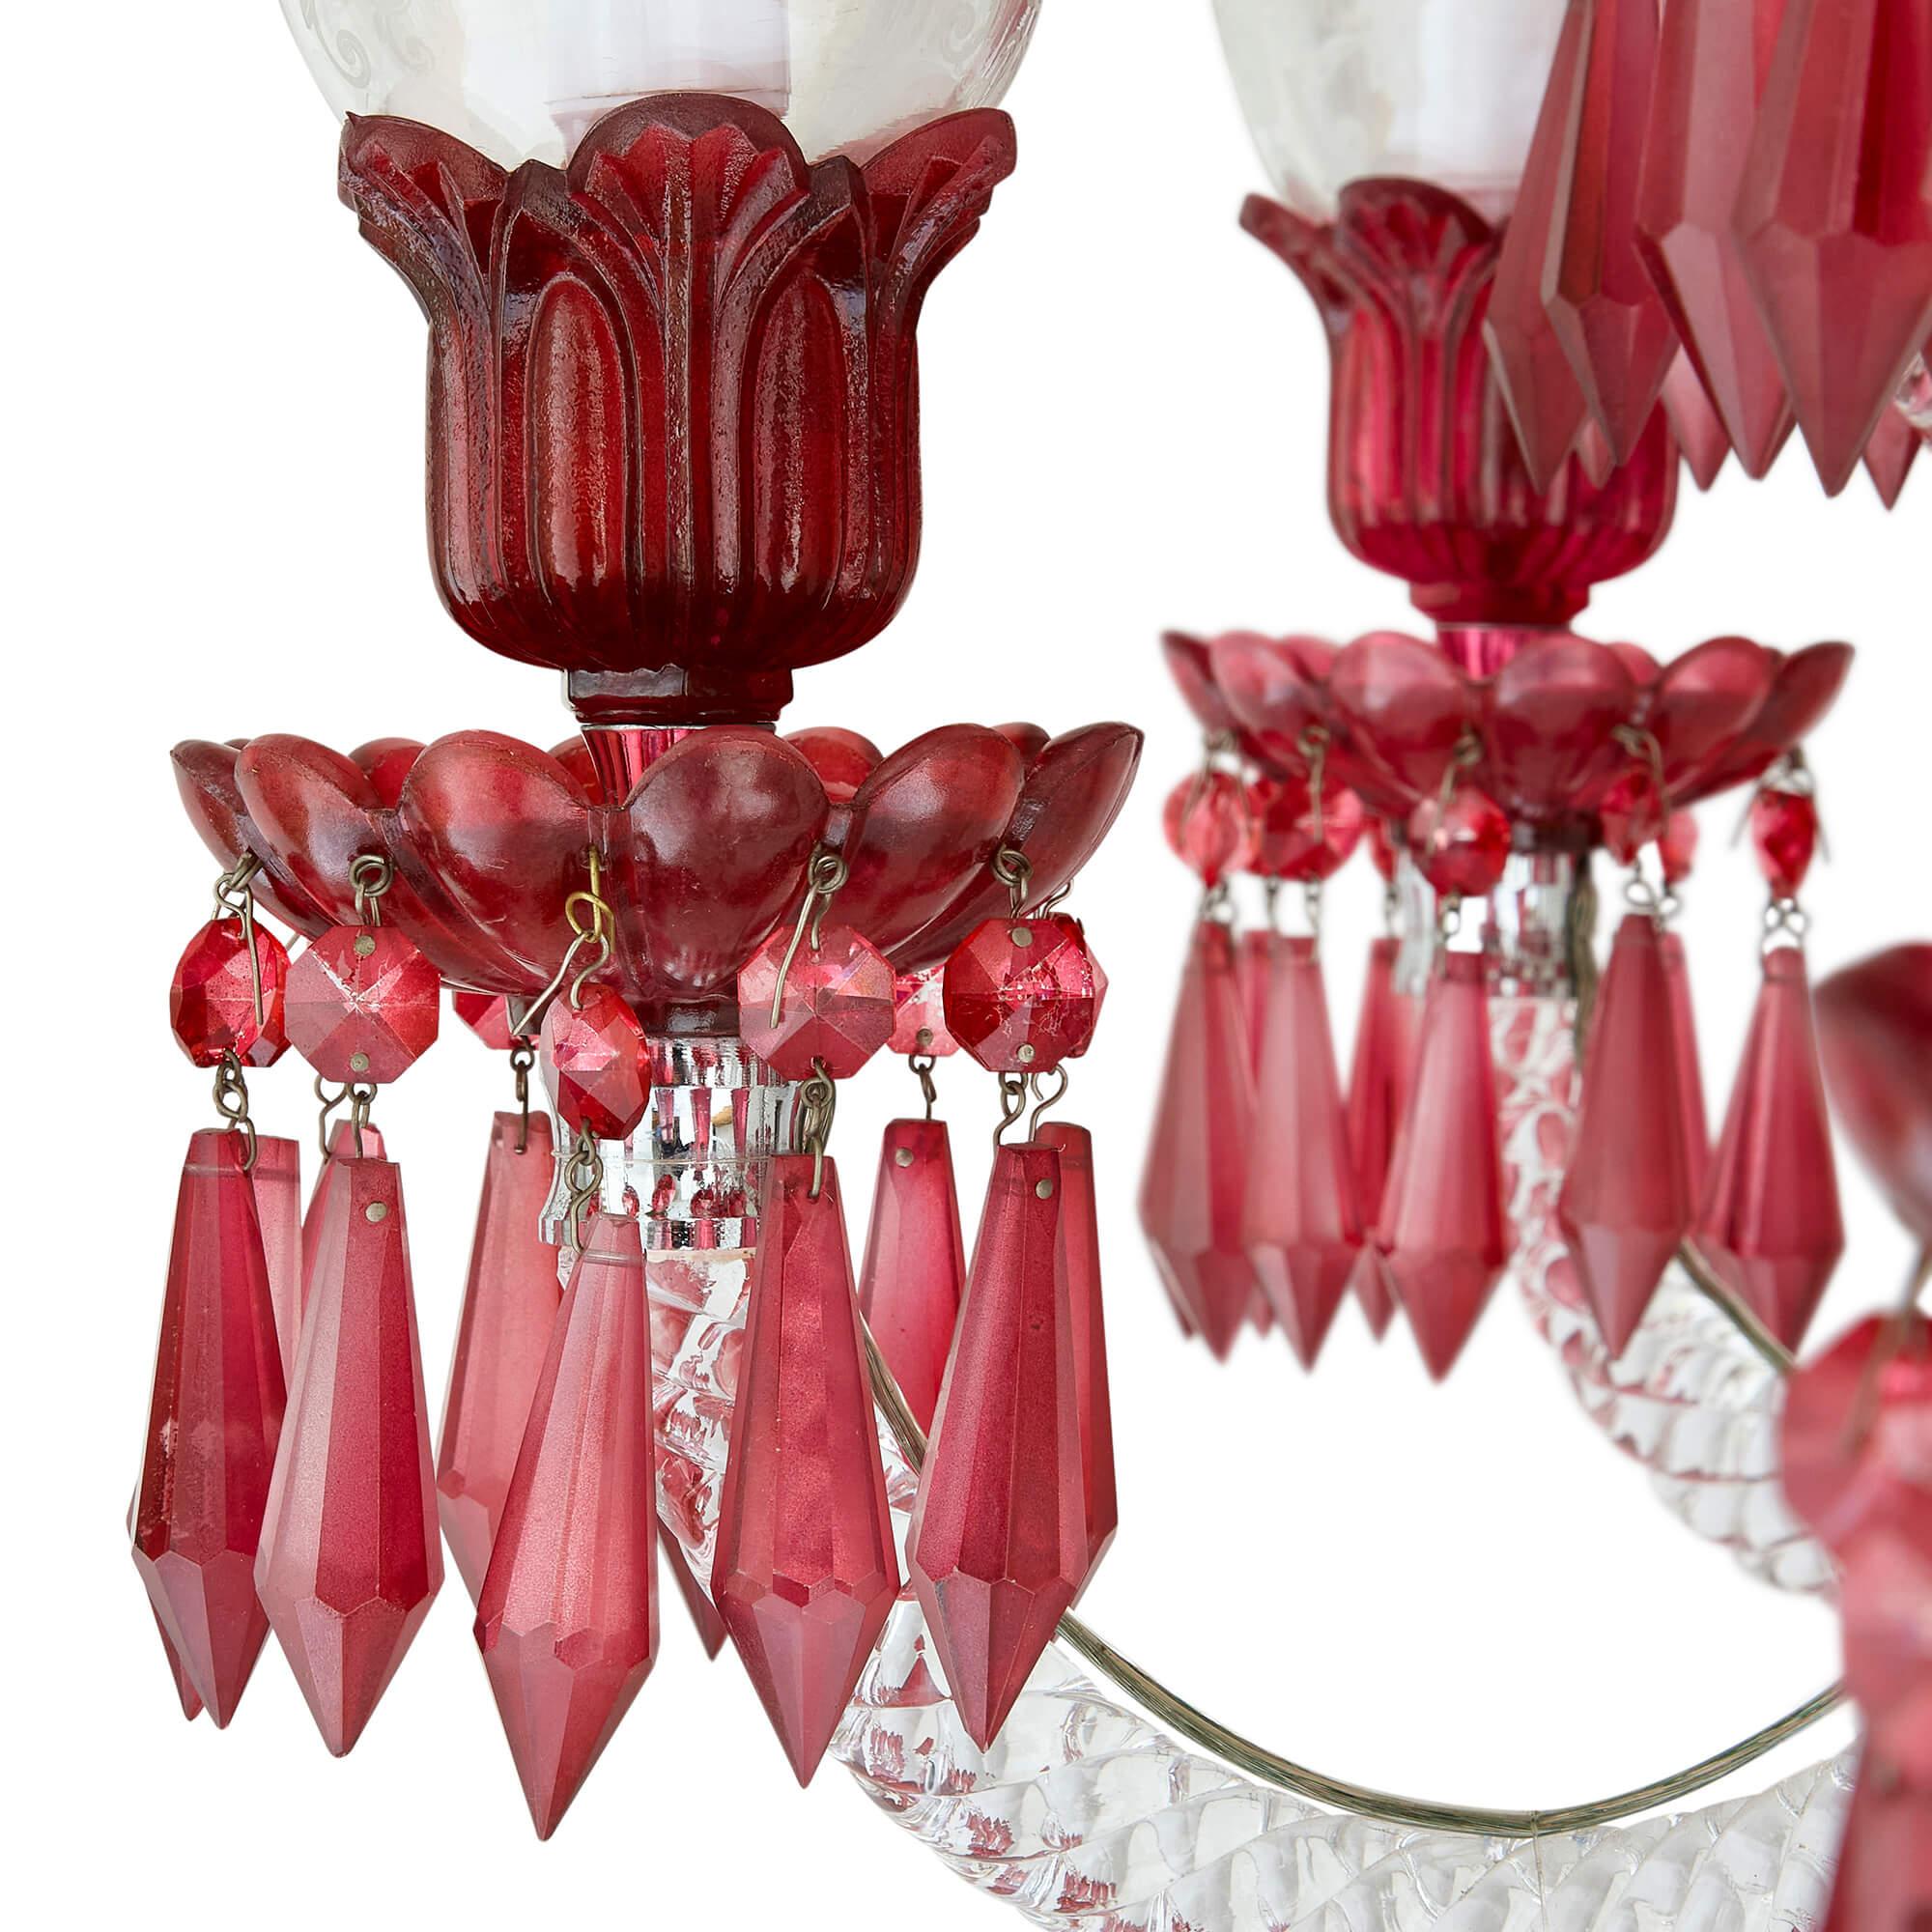 Large clear and red cut glass chandelier 
Continental, 20th Century
Height 108cm, diameter 108cm

With its sensational design, this chandelier effectively conjures up the opulence of the Belle Époque period. The red glass central stem of the